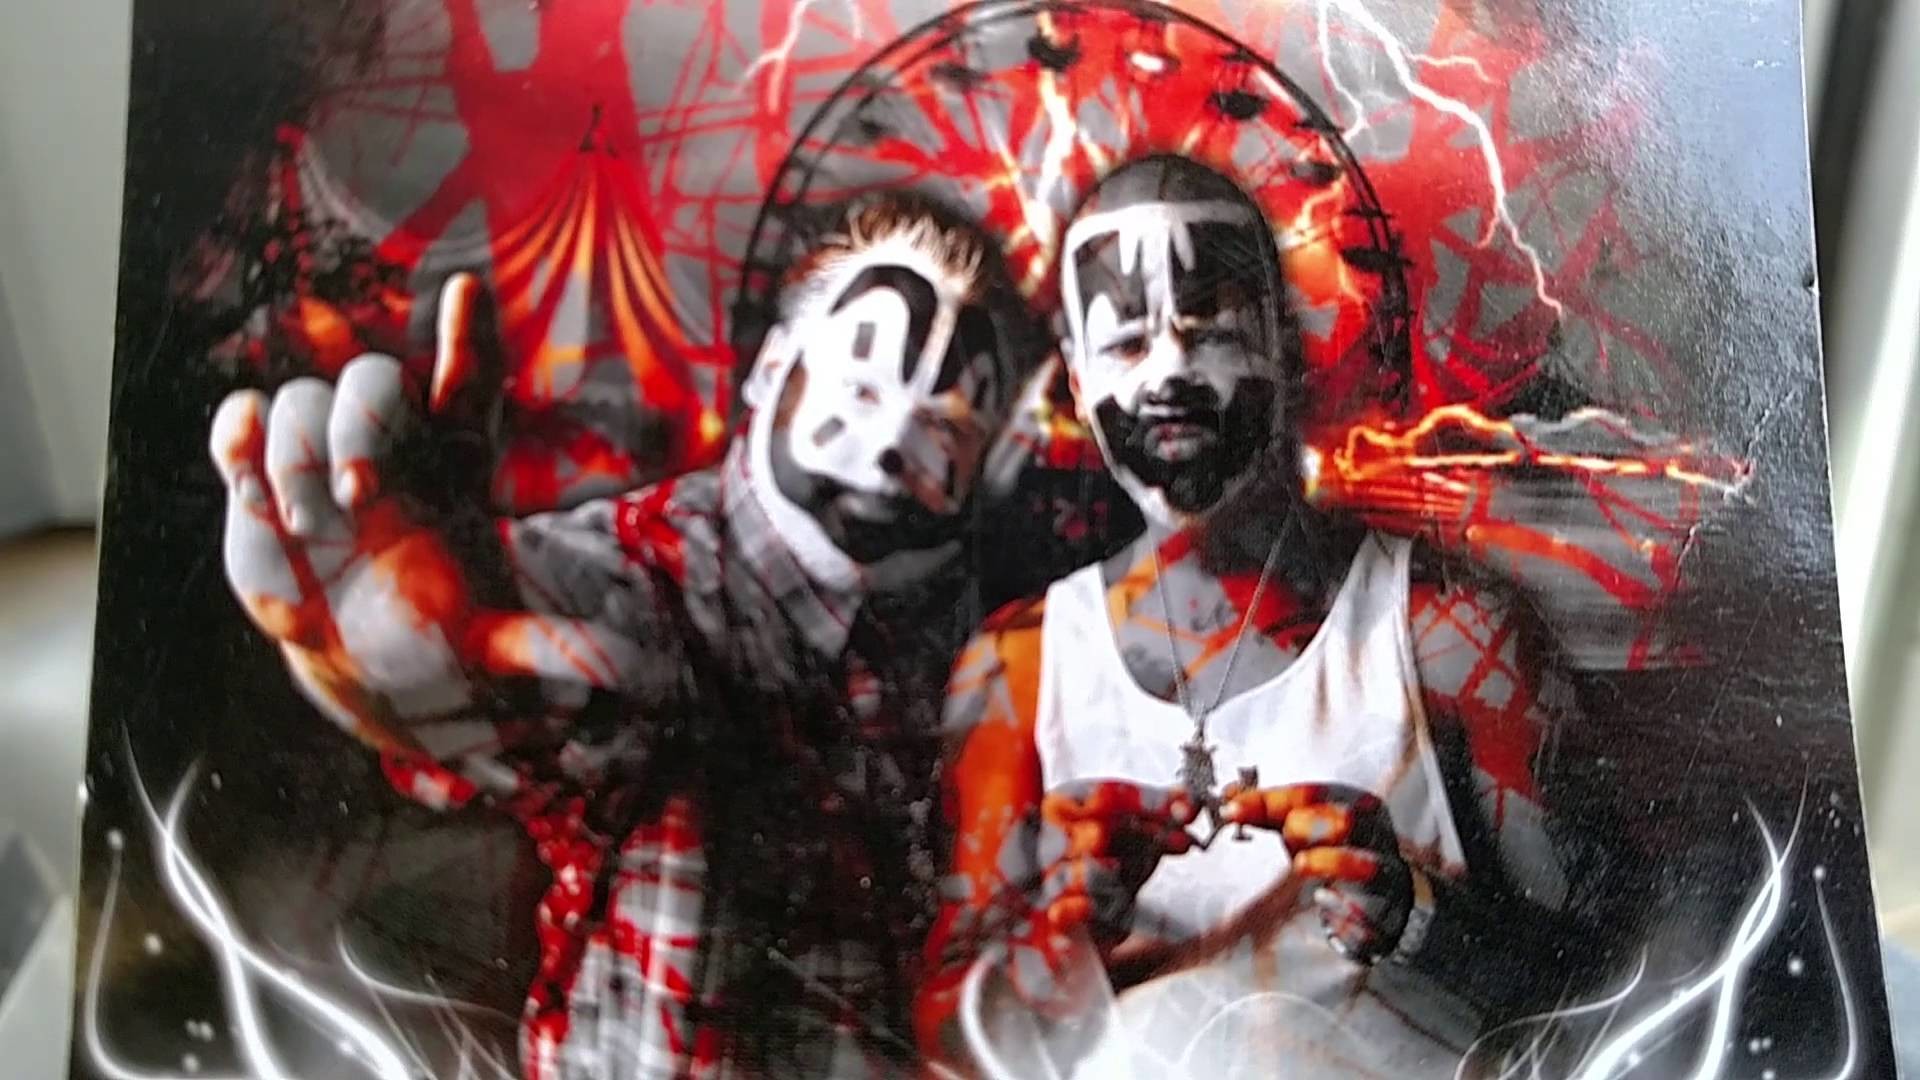 1920x1080 The gathering of juggalos. JCW wrestling 2016 Bloo